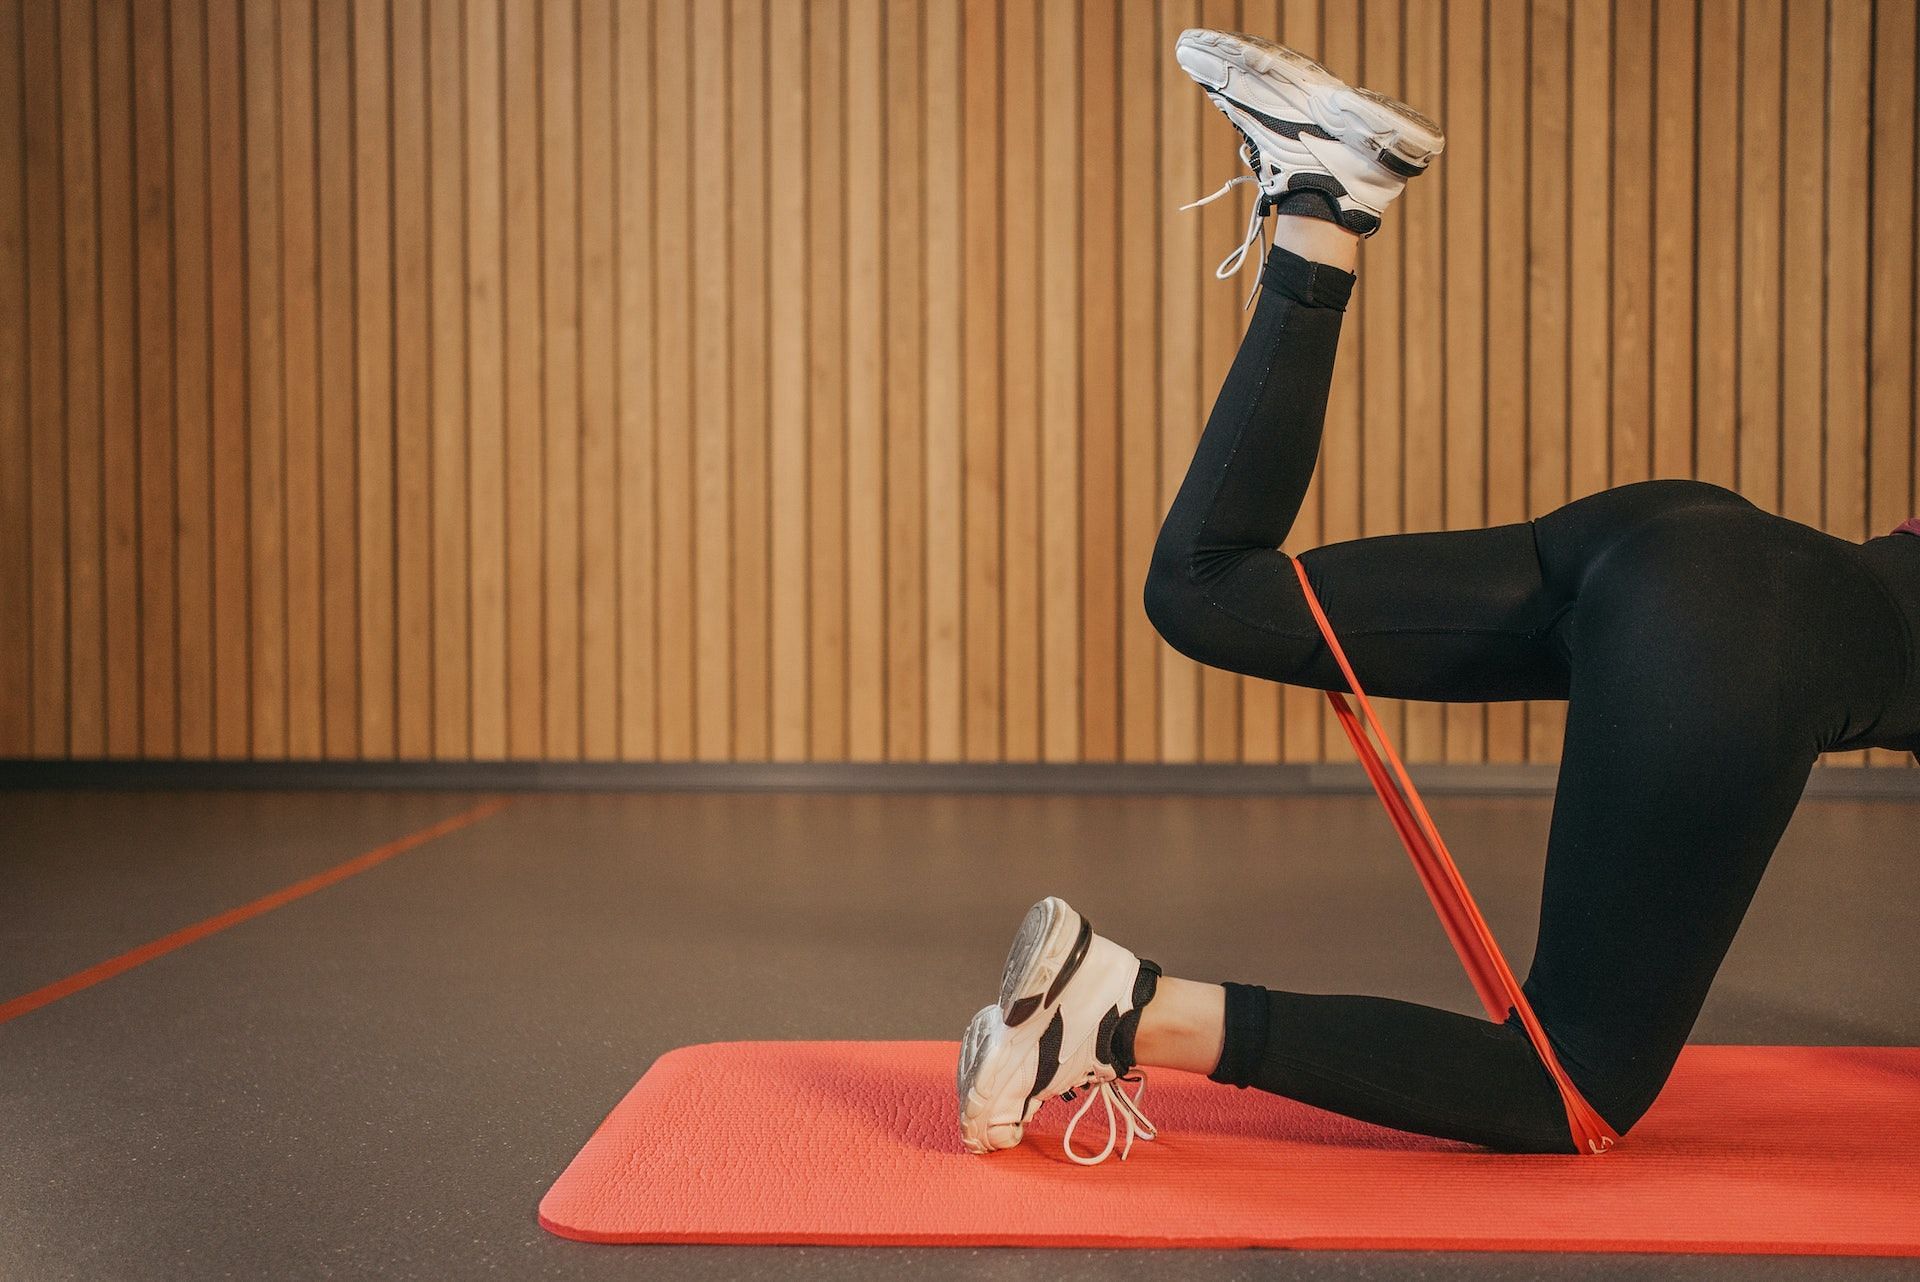 Resistance band core exercises stabilize the spine. (Image via Pexels/Pavel Danilyuk)